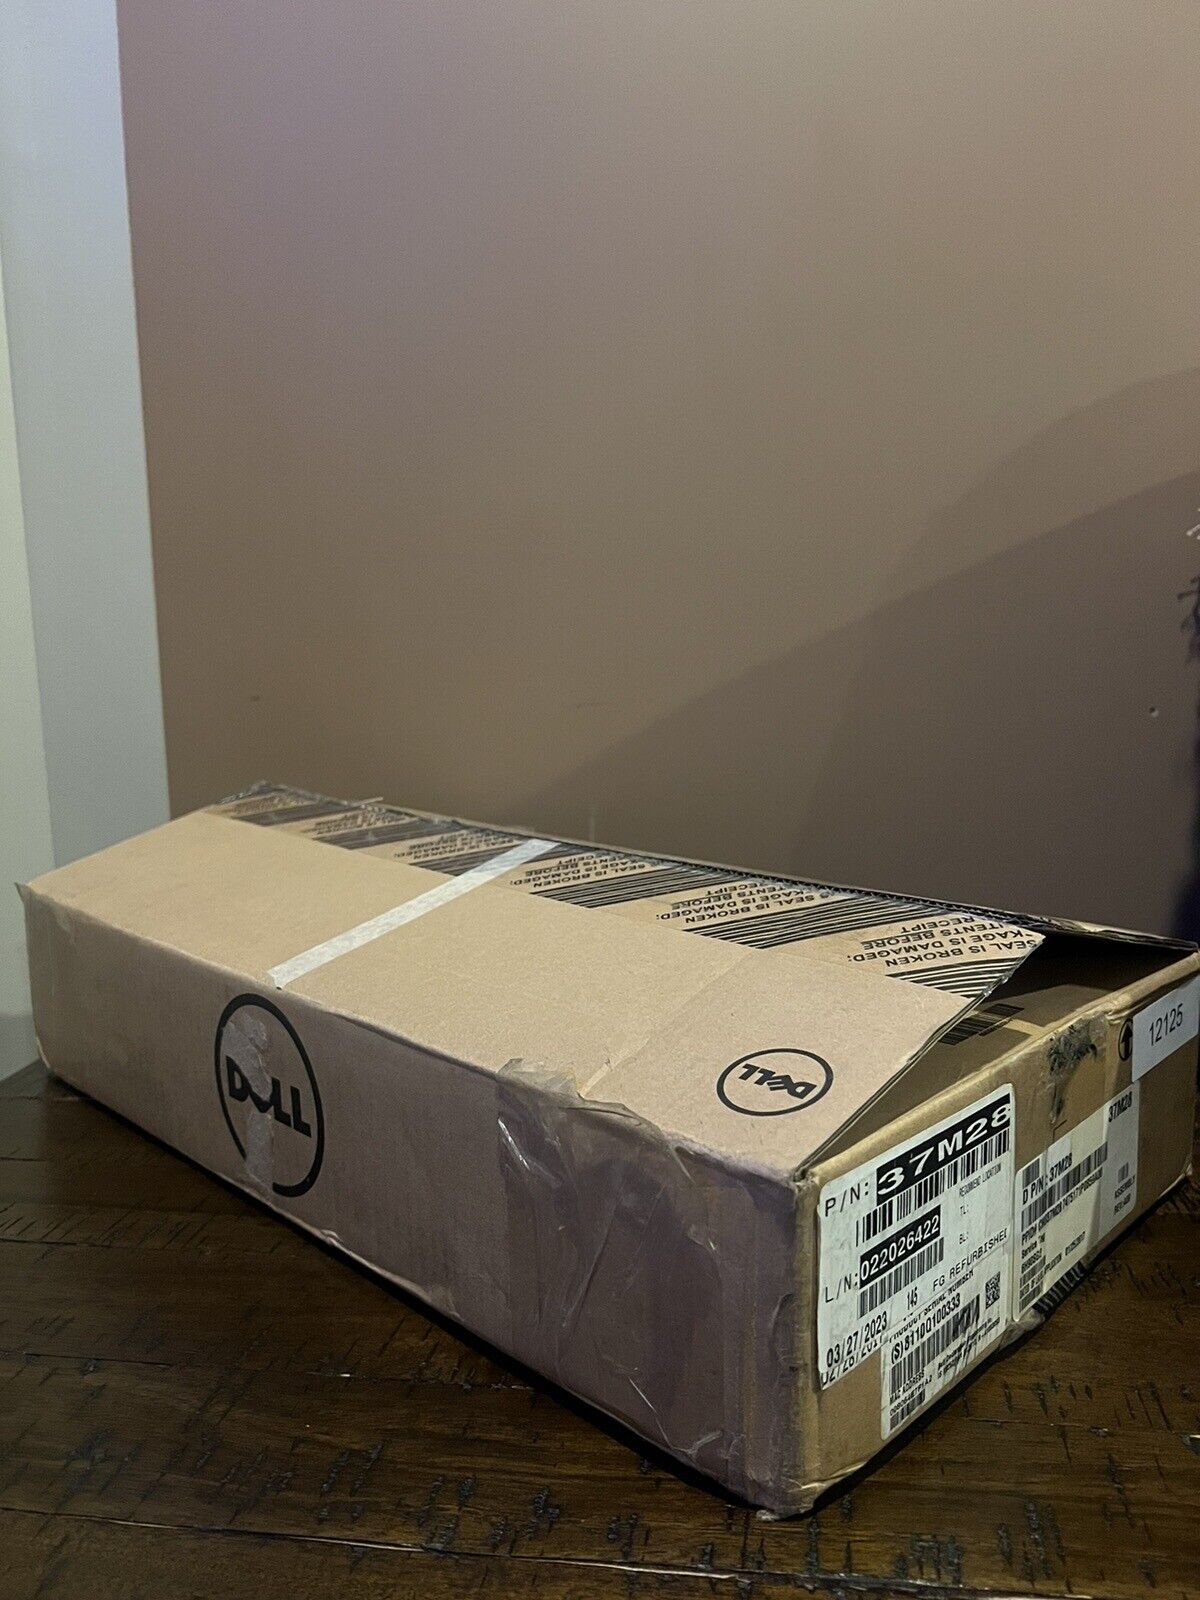 Genuine Dell Wyse Zx0 7010 Thin Client Dual Core 1.67GHz 6KC5H WIFI Device Only